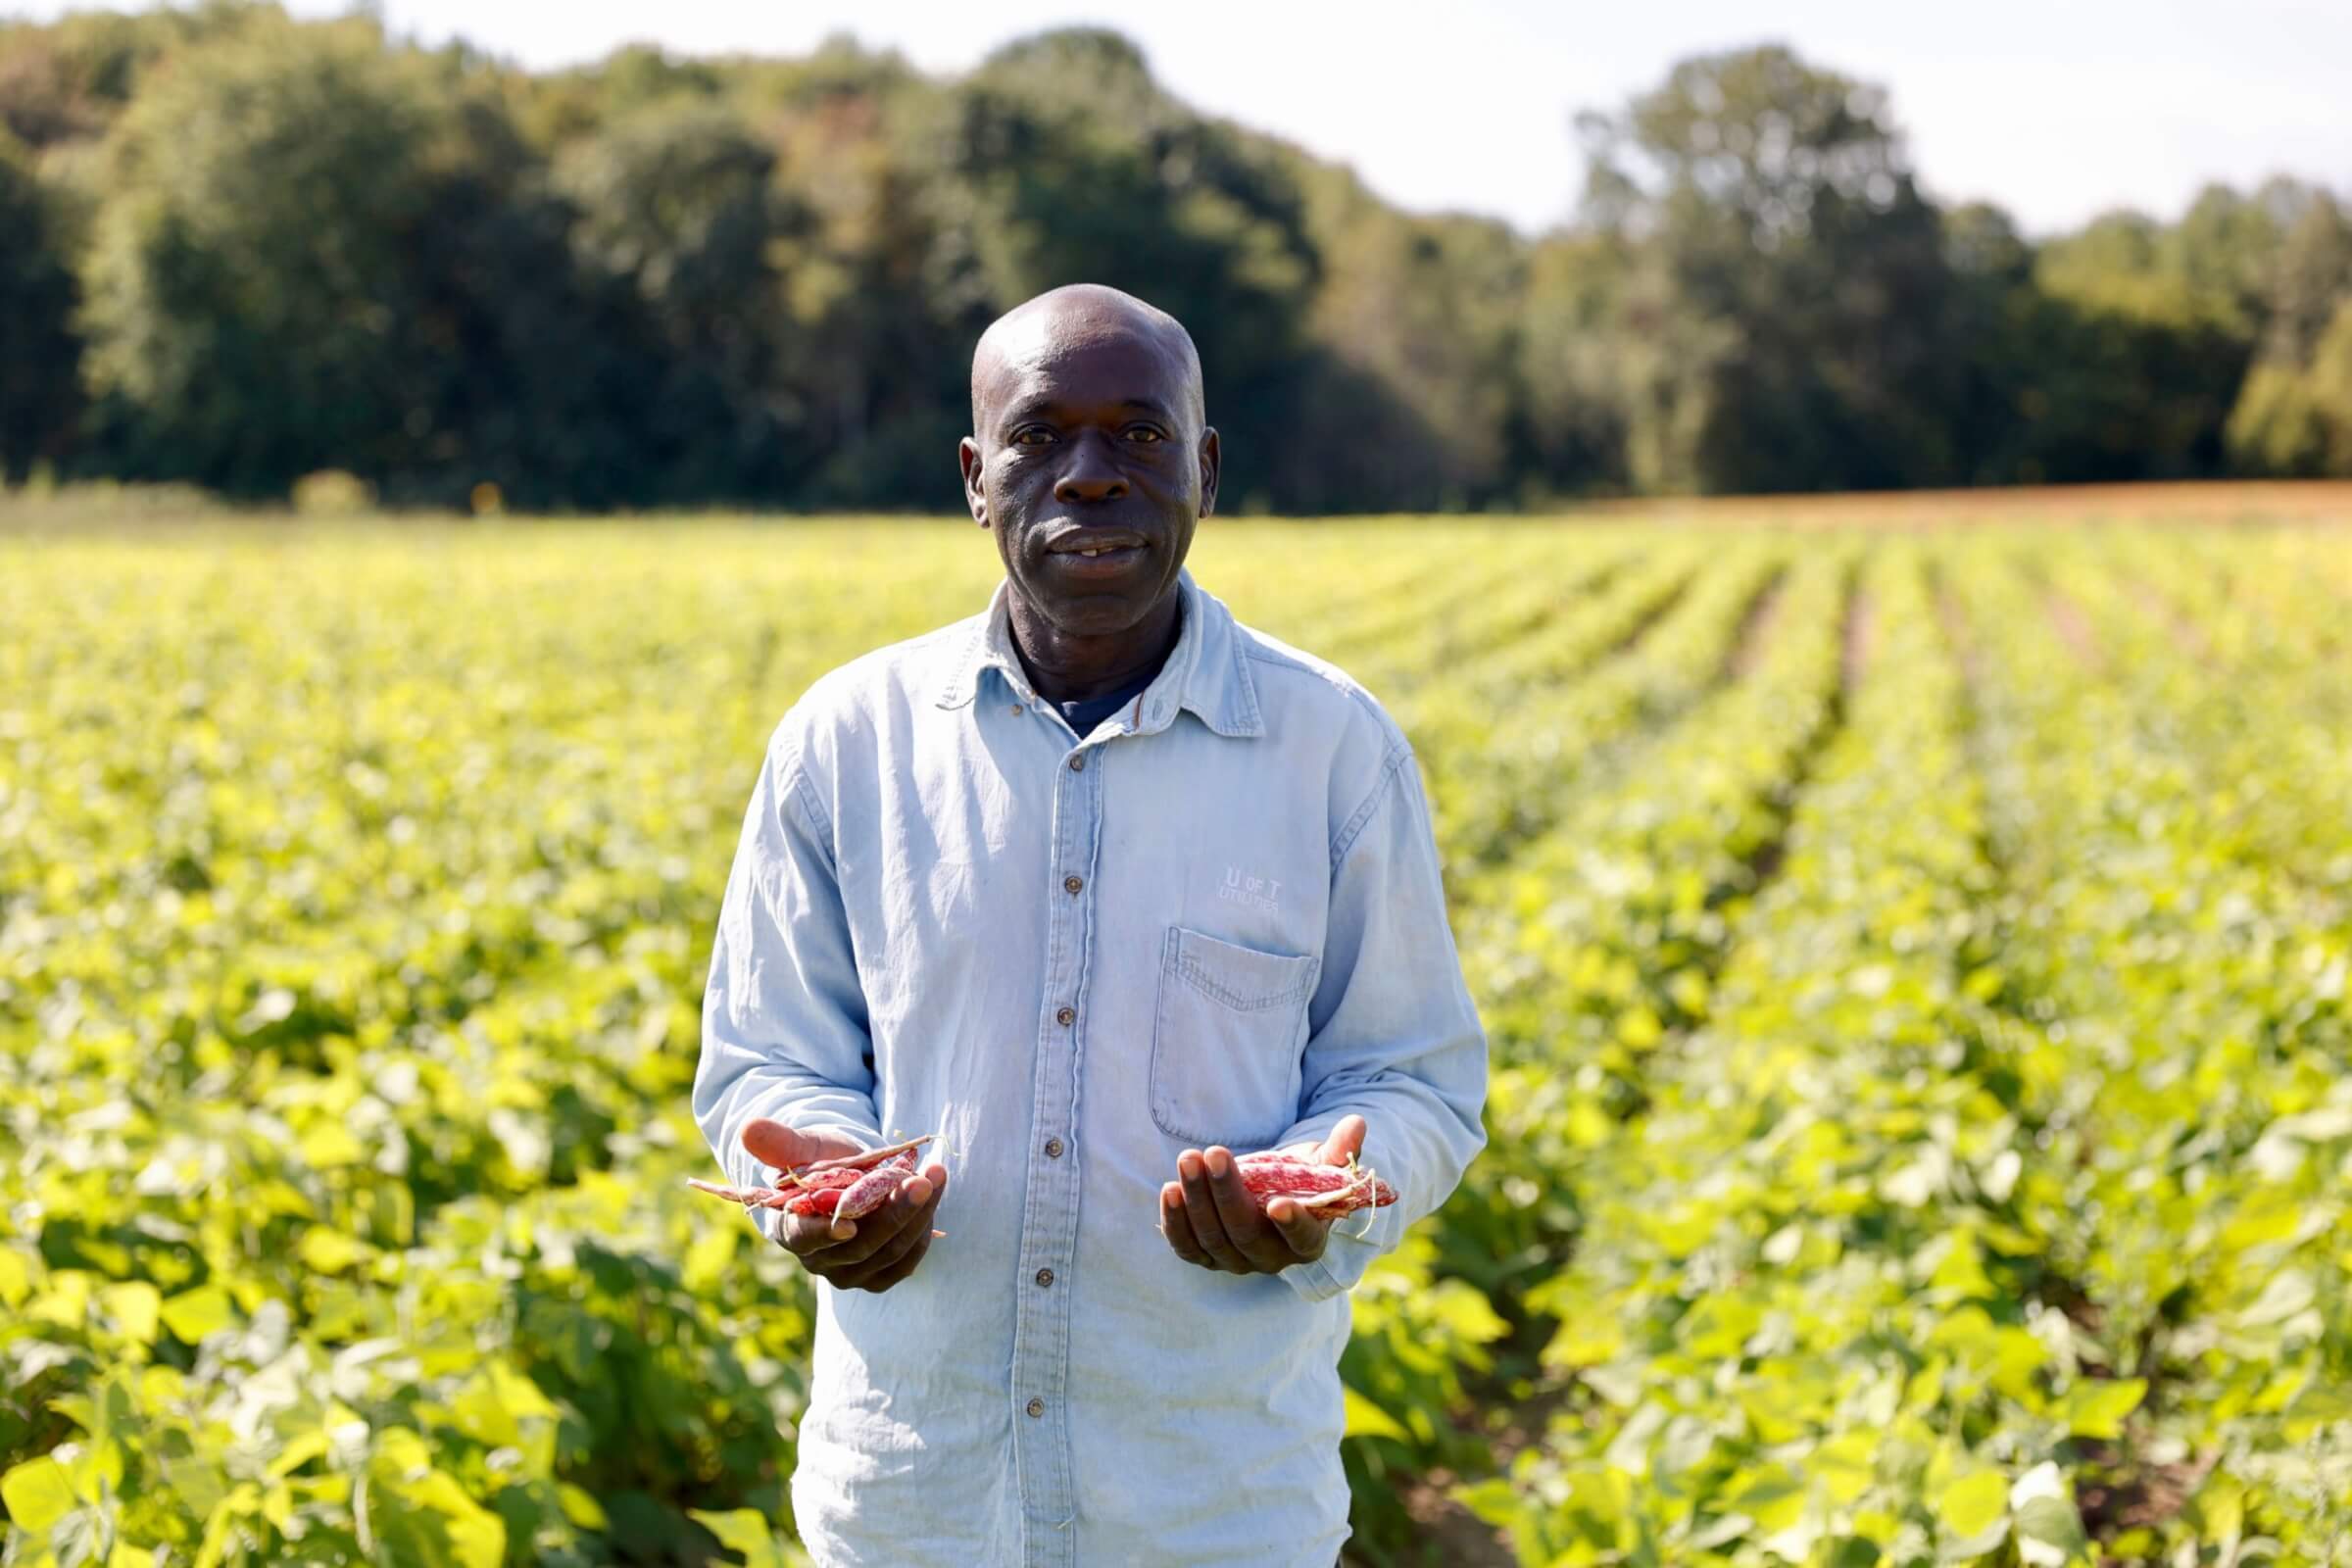 Meet Tony, Seasonal Agricultural Worker from Jamaica